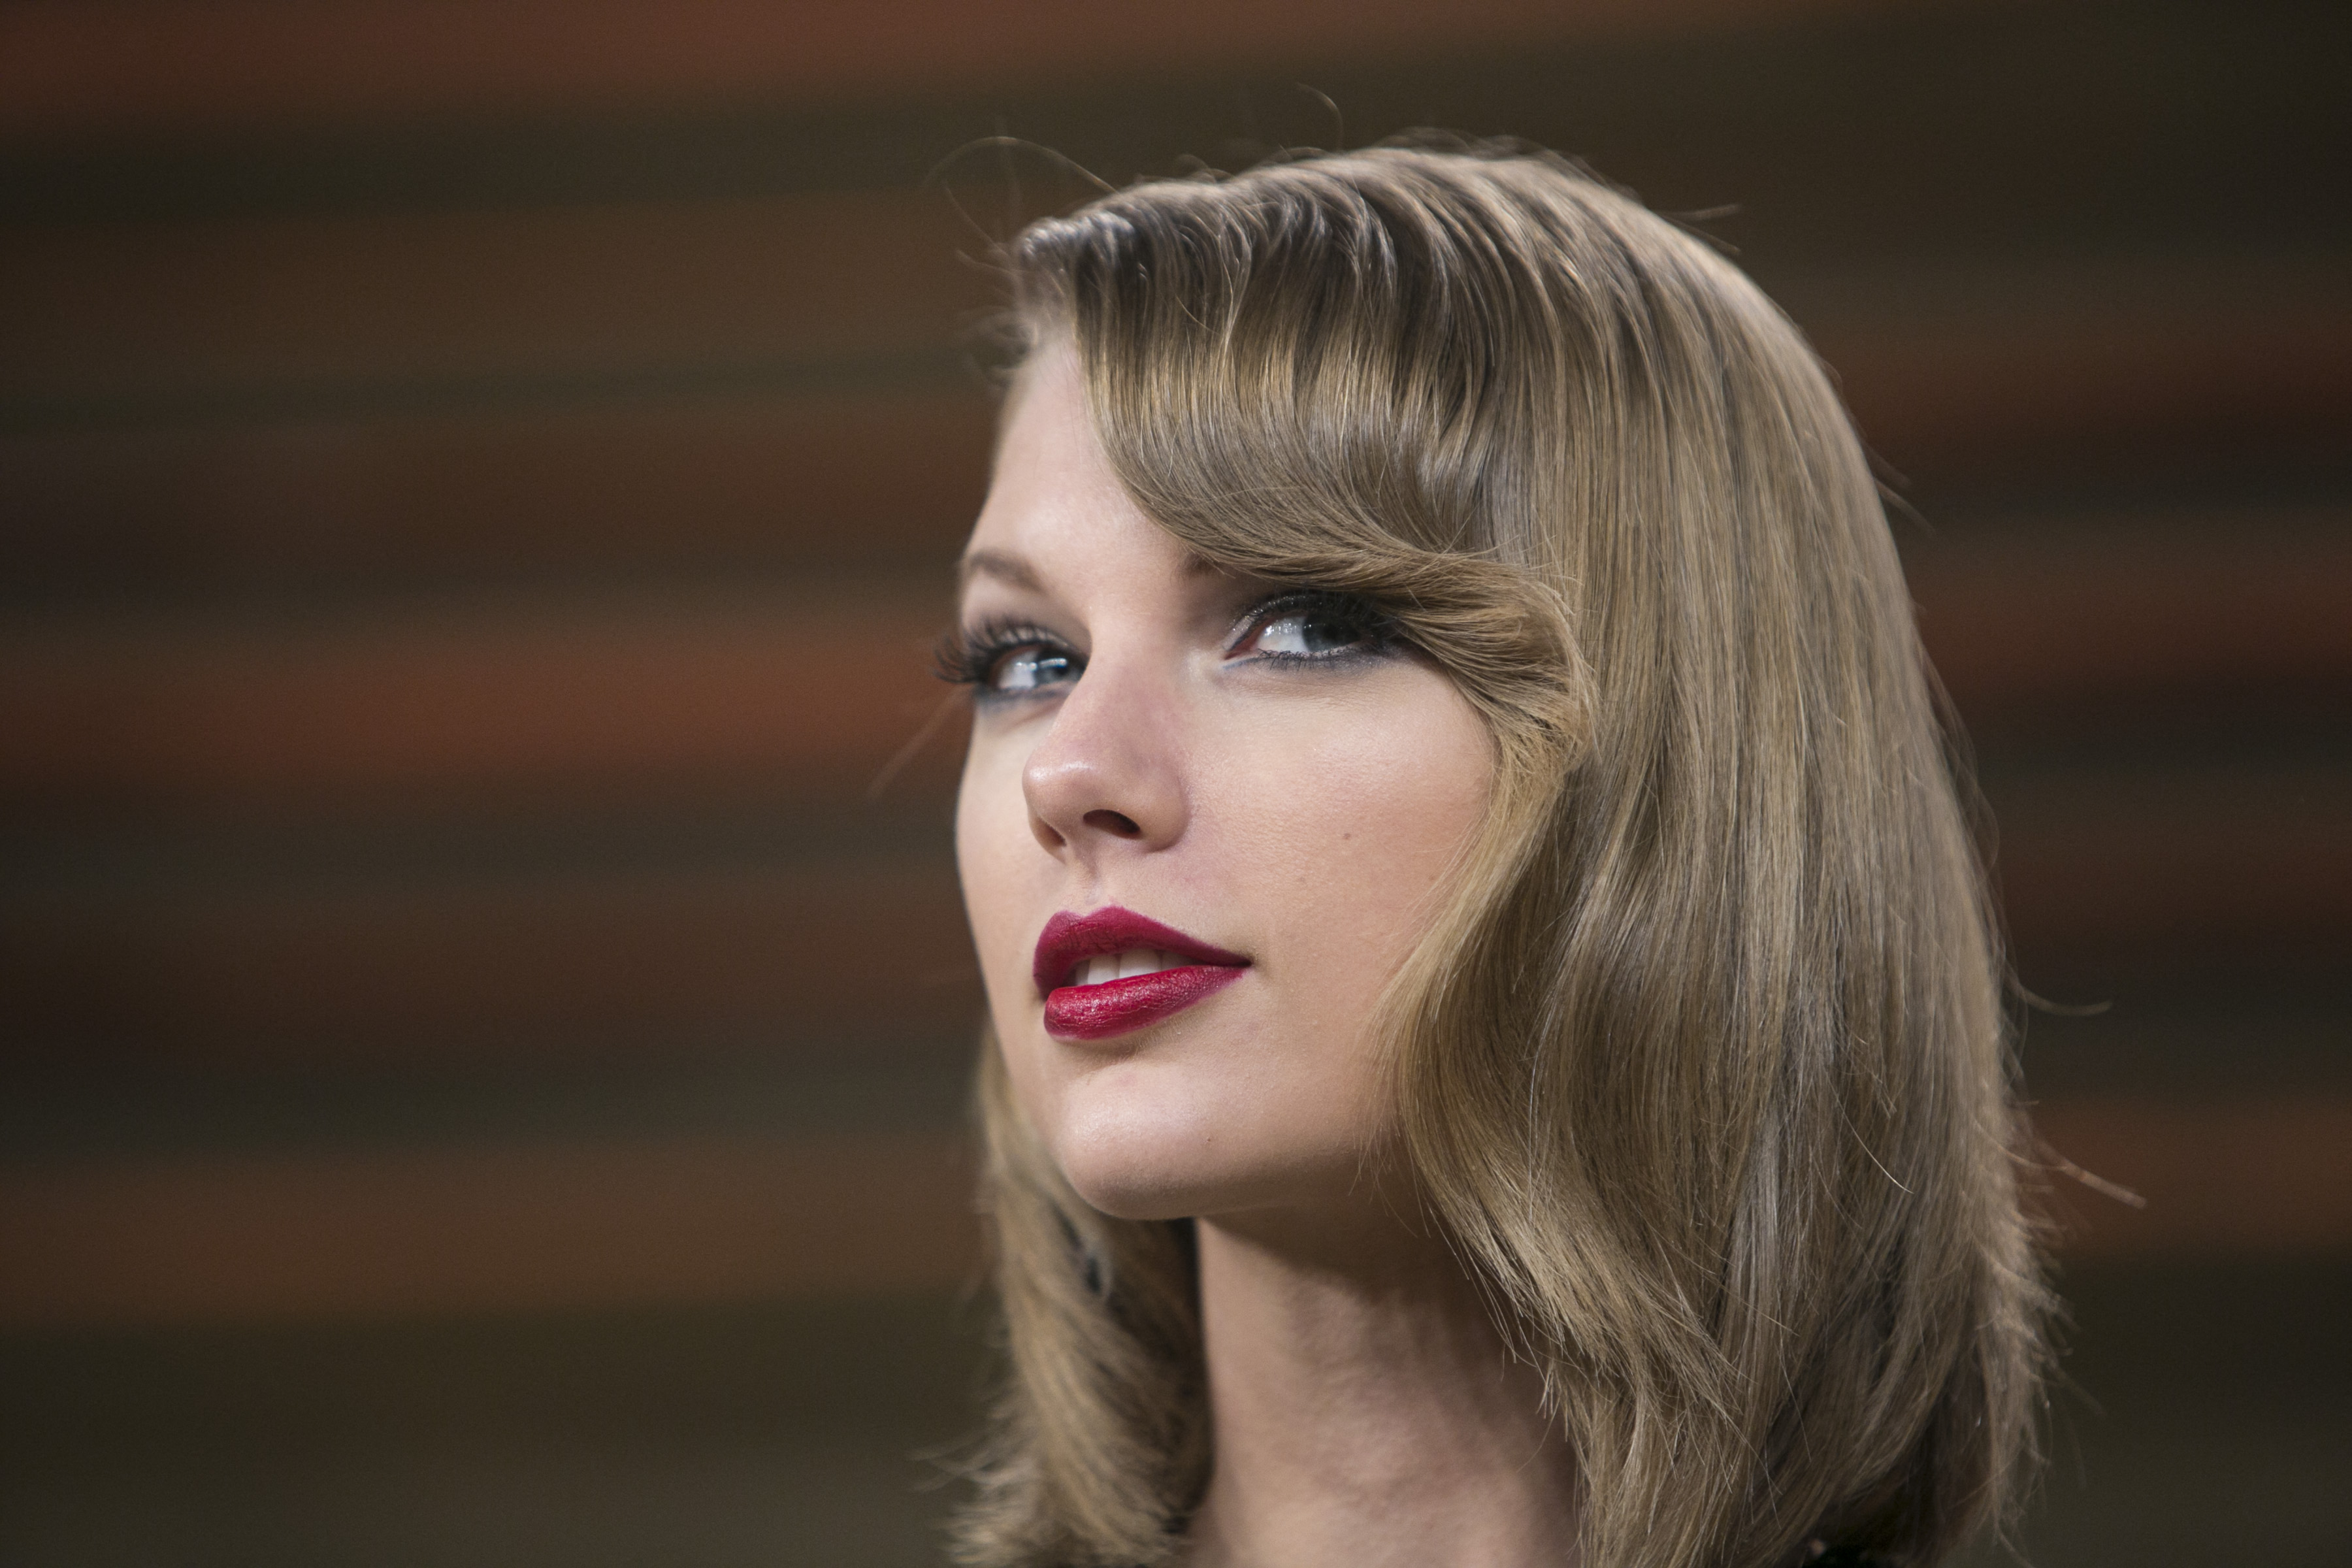 Taylor Swift teaches young women the superpower of letting go of shame | Opinion